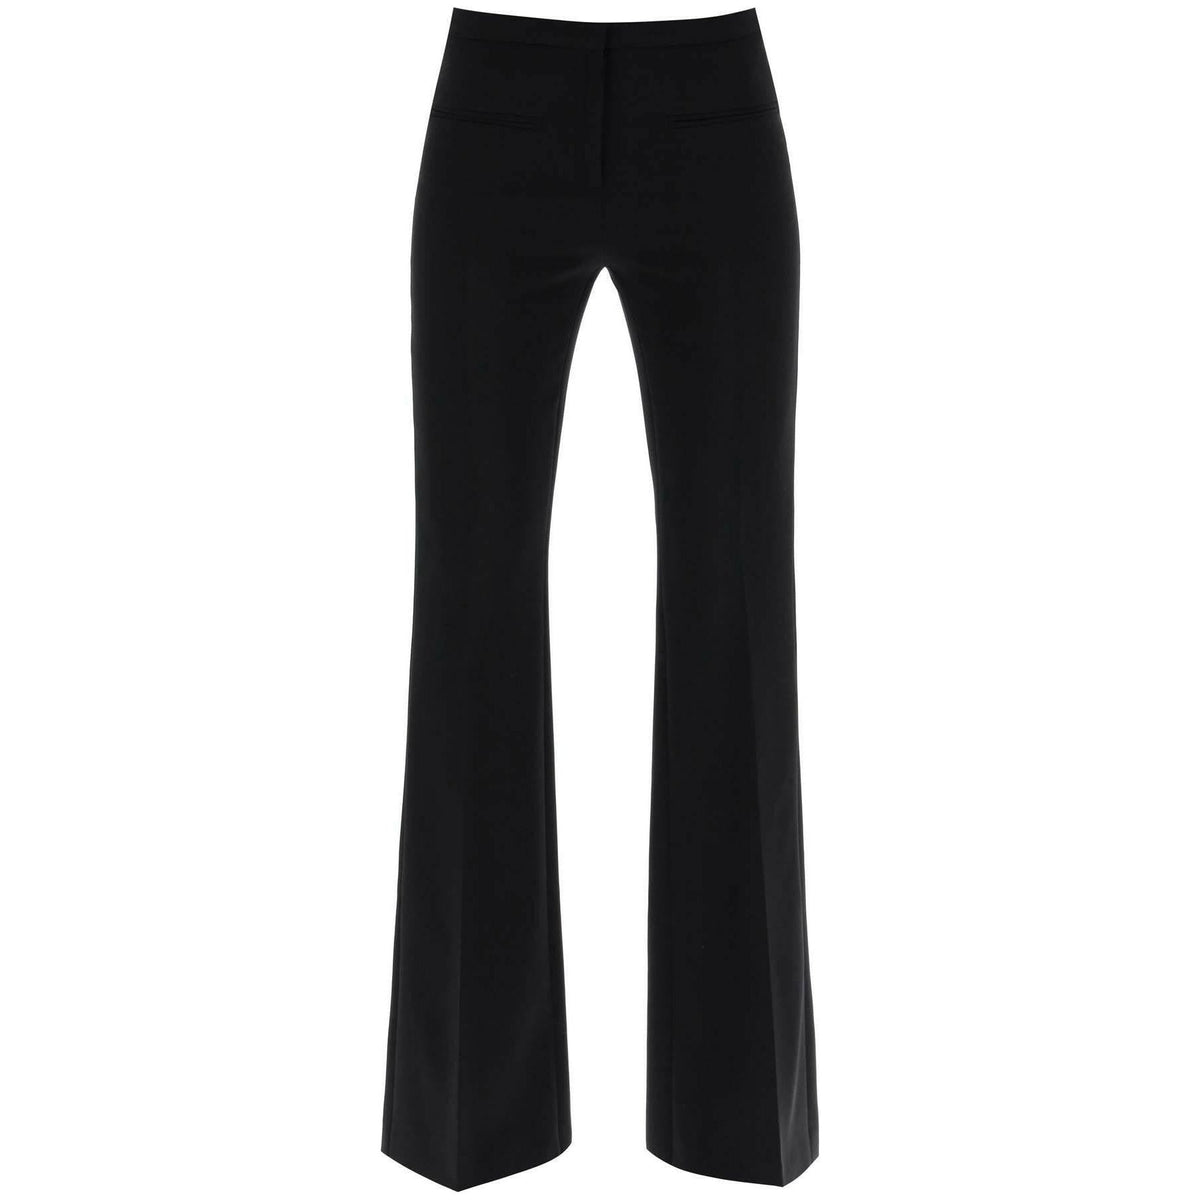 COURREGES - Black Tailored Bootcut Pants In Technical Jersey - JOHN JULIA